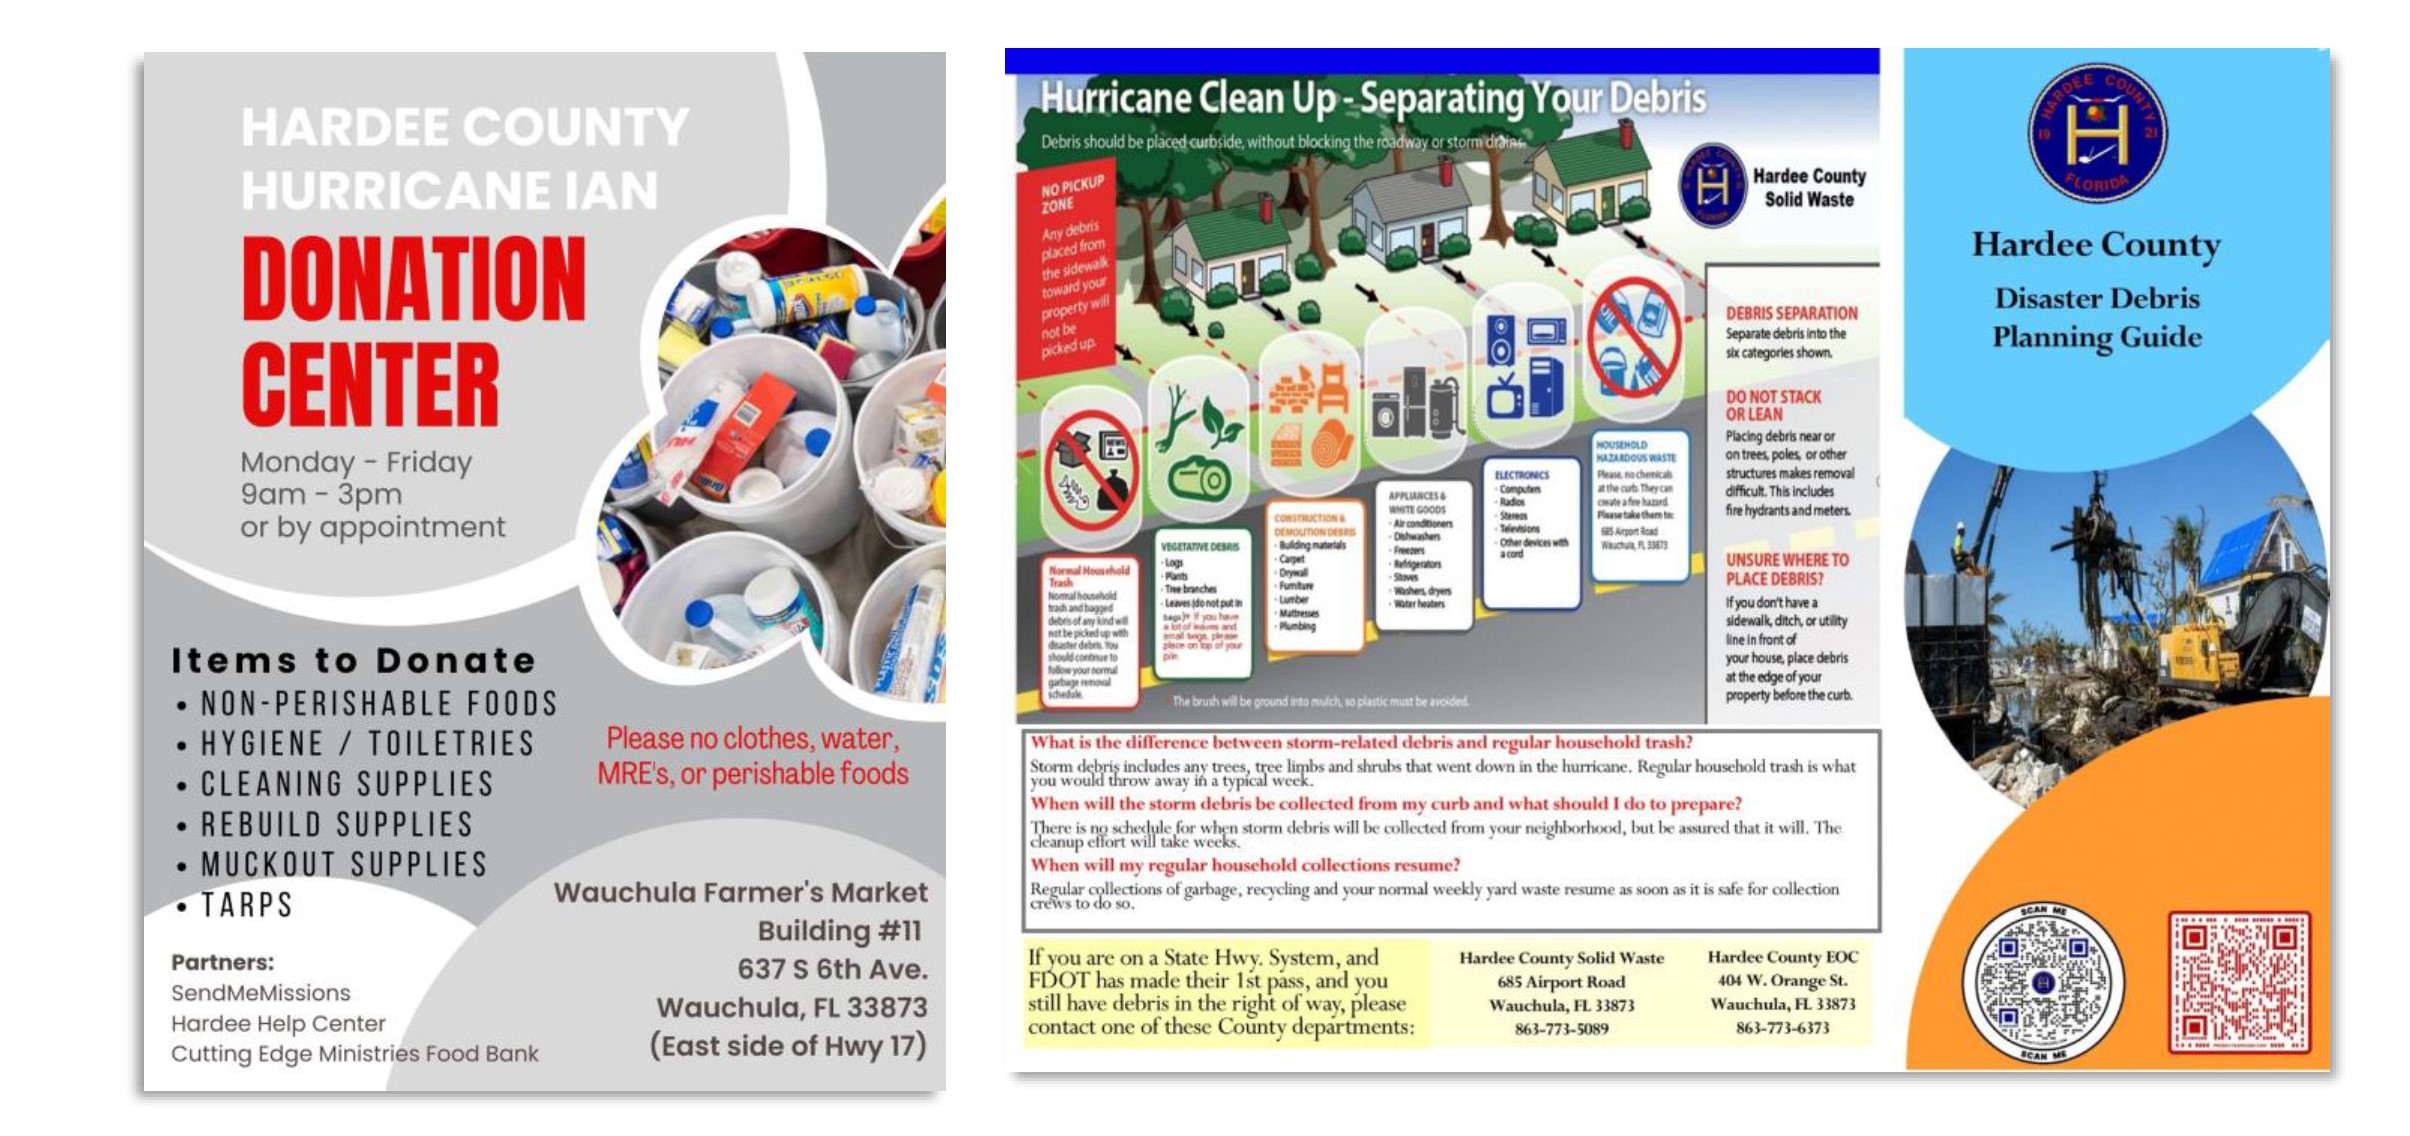 Hardee County Hurricane IAN Donation Center & Hurricane Cleanup Flyer Graphic